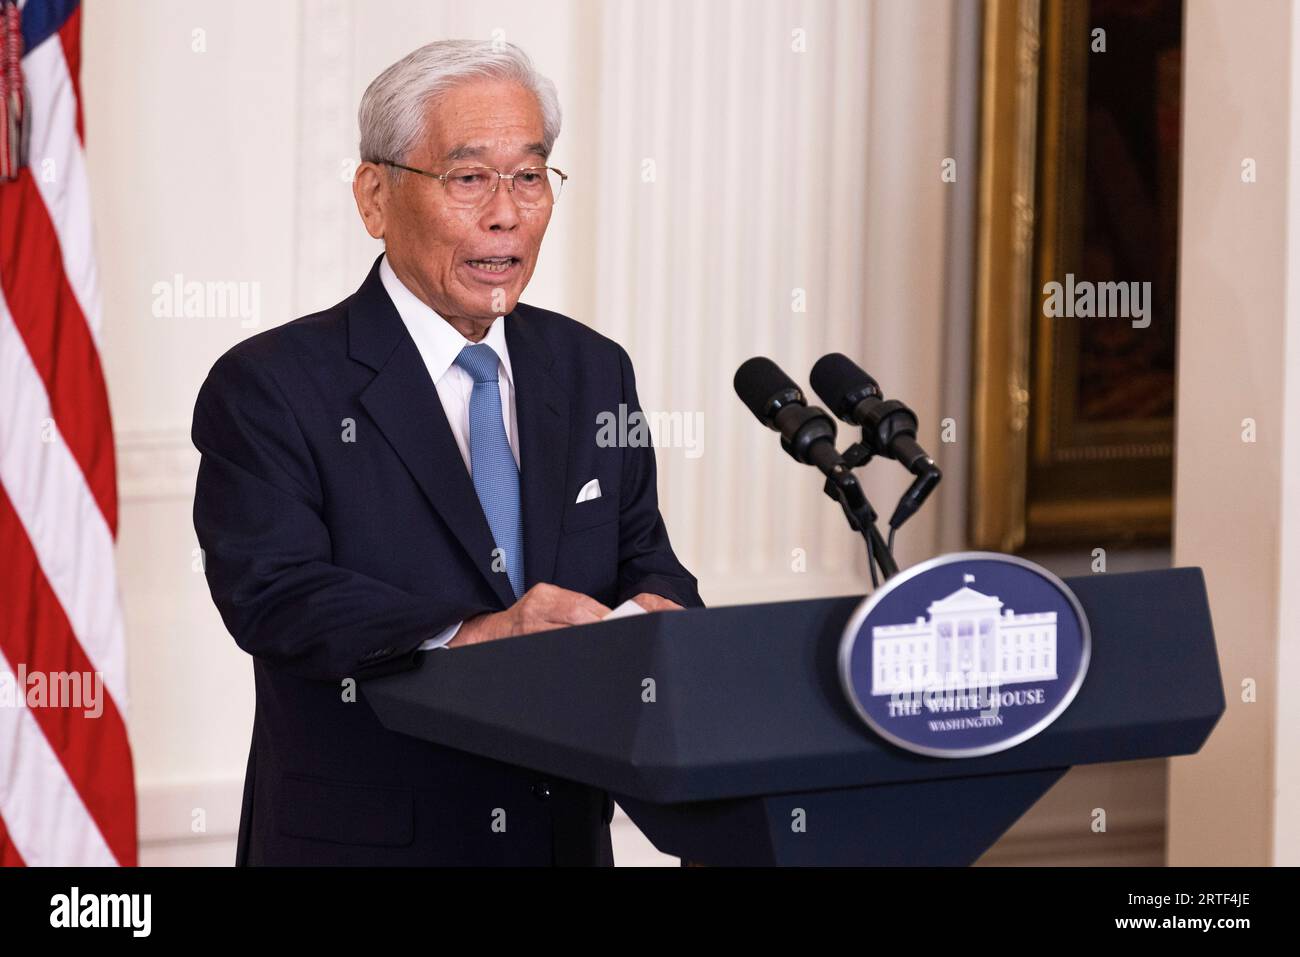 The Arts. 12th Sep, 2023. Hisashi Hieda, Chairman of the Japan Art Association gives remarks in the East Room of the White House during the 2023 Praemium Imperiale Laureate ceremony in Washington, DC on Tuesday, September 12, 2023. The Praemium Imperiale is a global arts prize awarded annually by the Japan Art Association for lifetime achievement in the arts. Credit: Aaron Schwartz/CNP/dpa/Alamy Live News Stock Photo